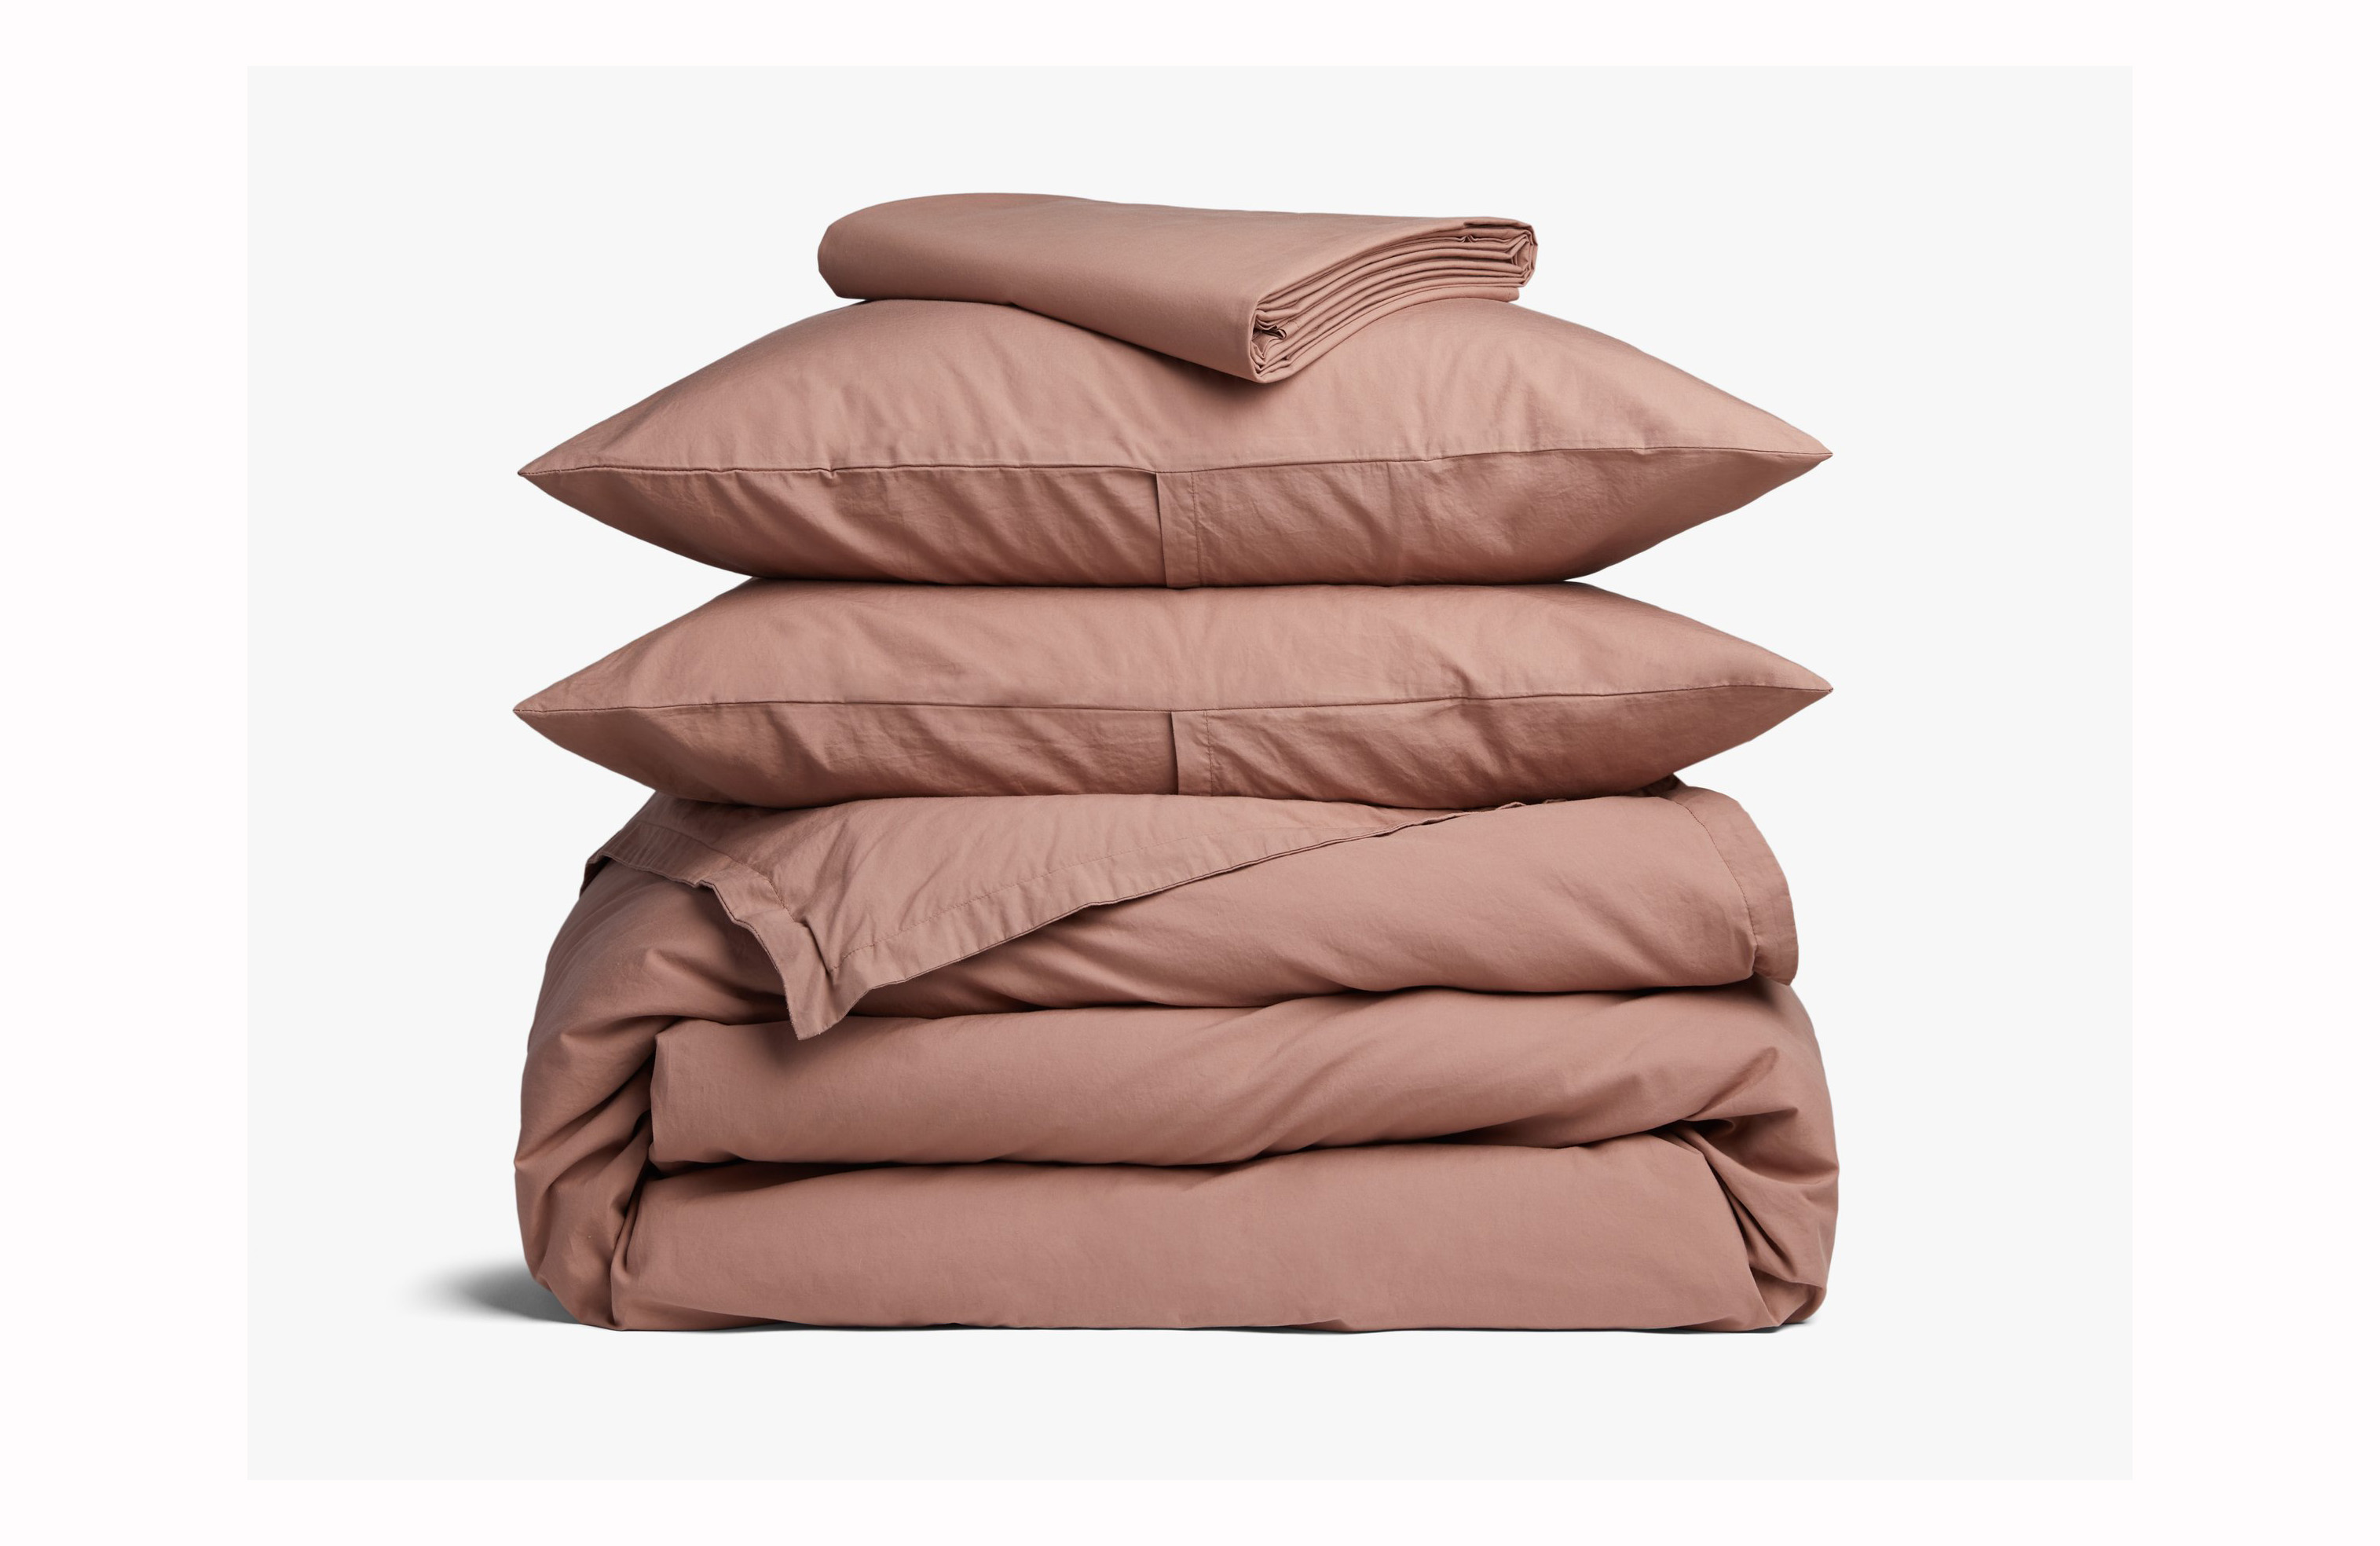 A stack of pillows and blankets in a rose pink color 